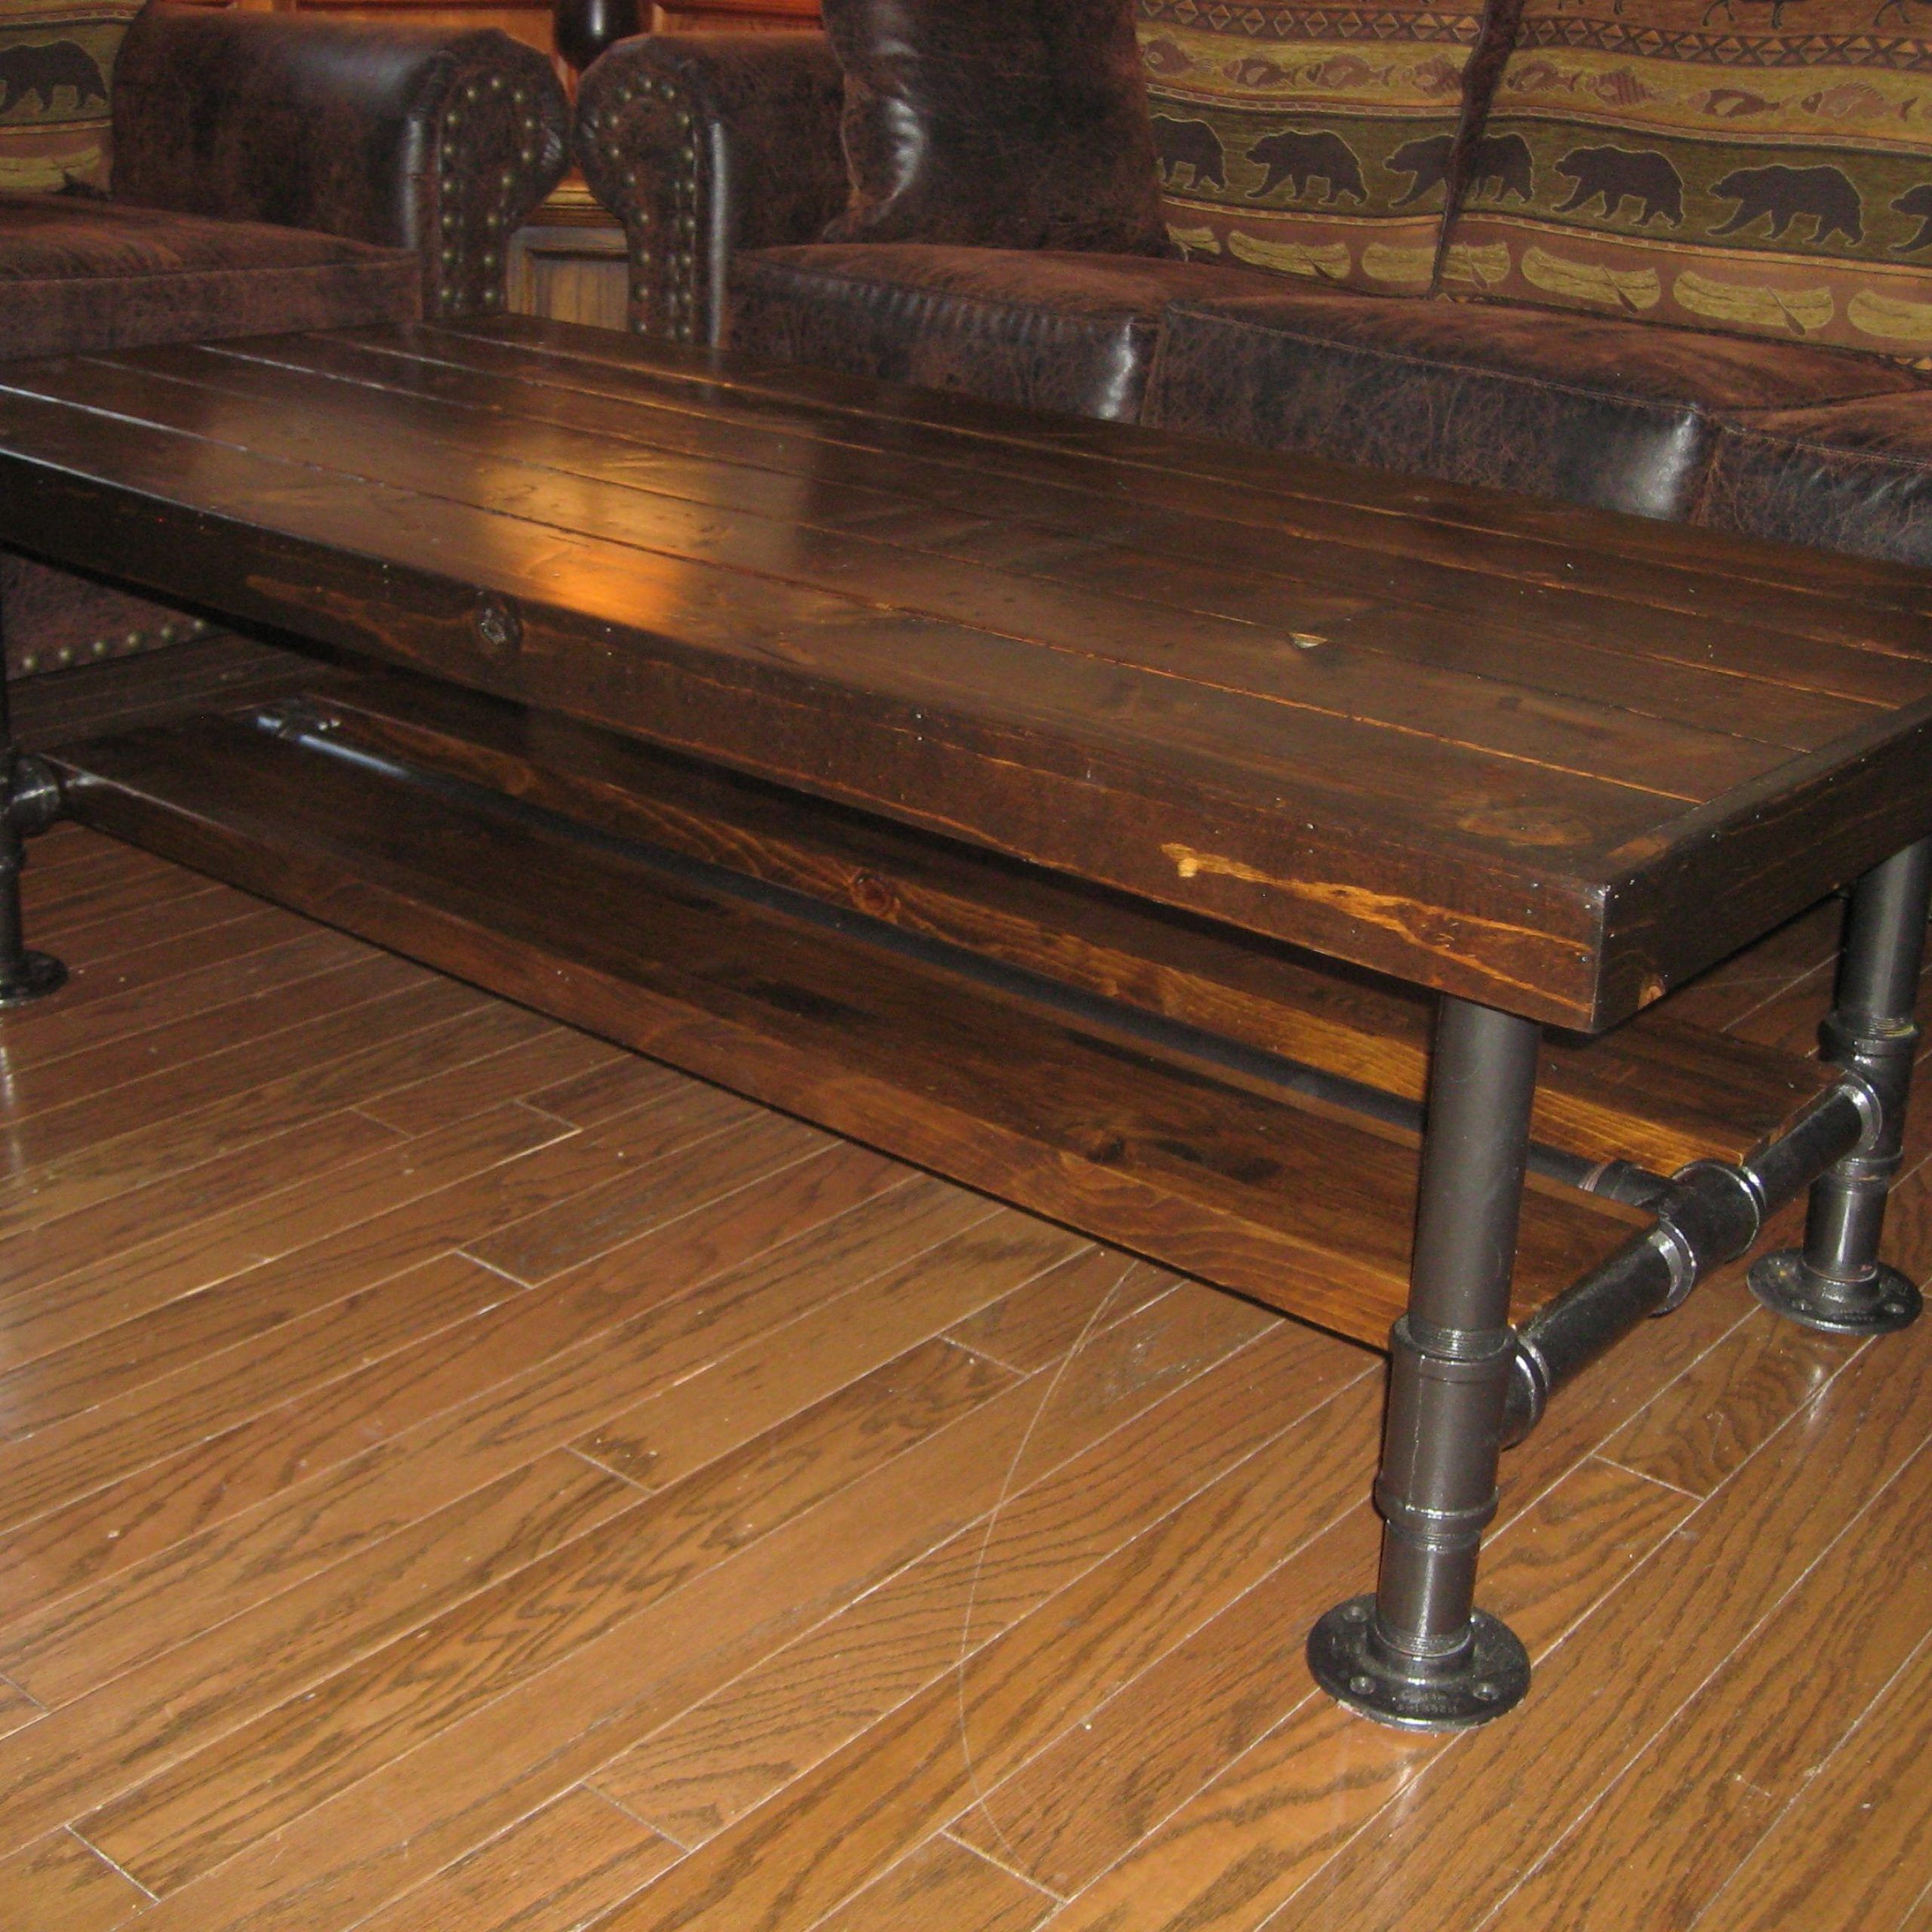 Trendy 10 Cast Iron Coffee Table Legs Collections With Oak Wood And Metal Legs Coffee Tables (View 7 of 20)